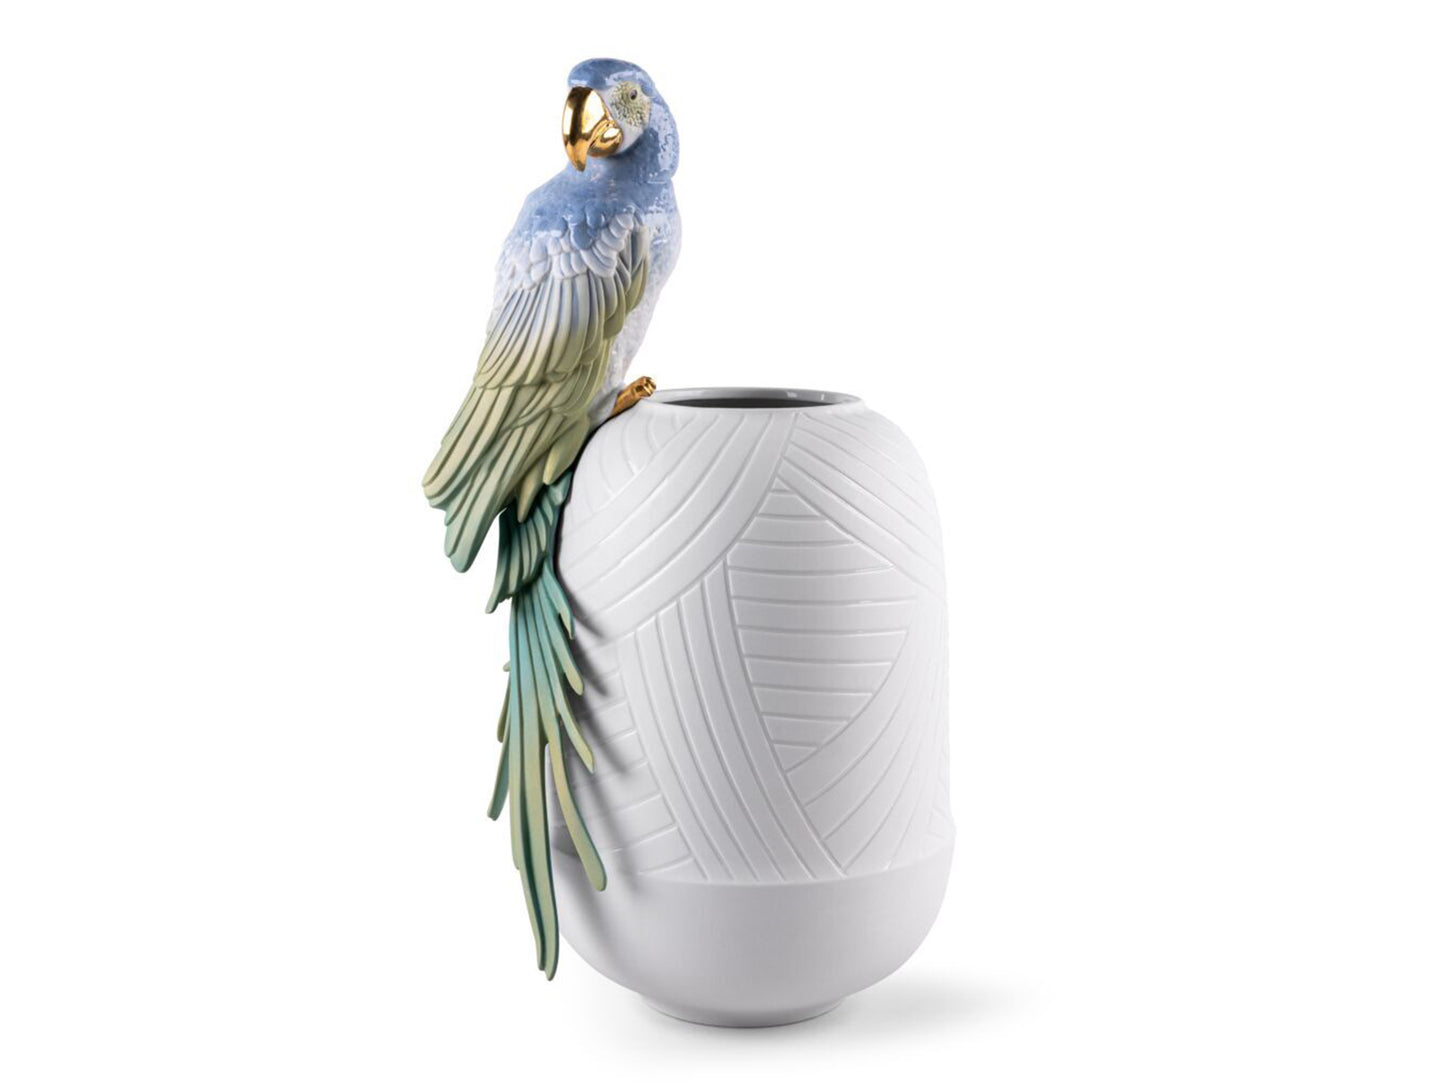 Colourful Macaw bird perches on the side of the white vase